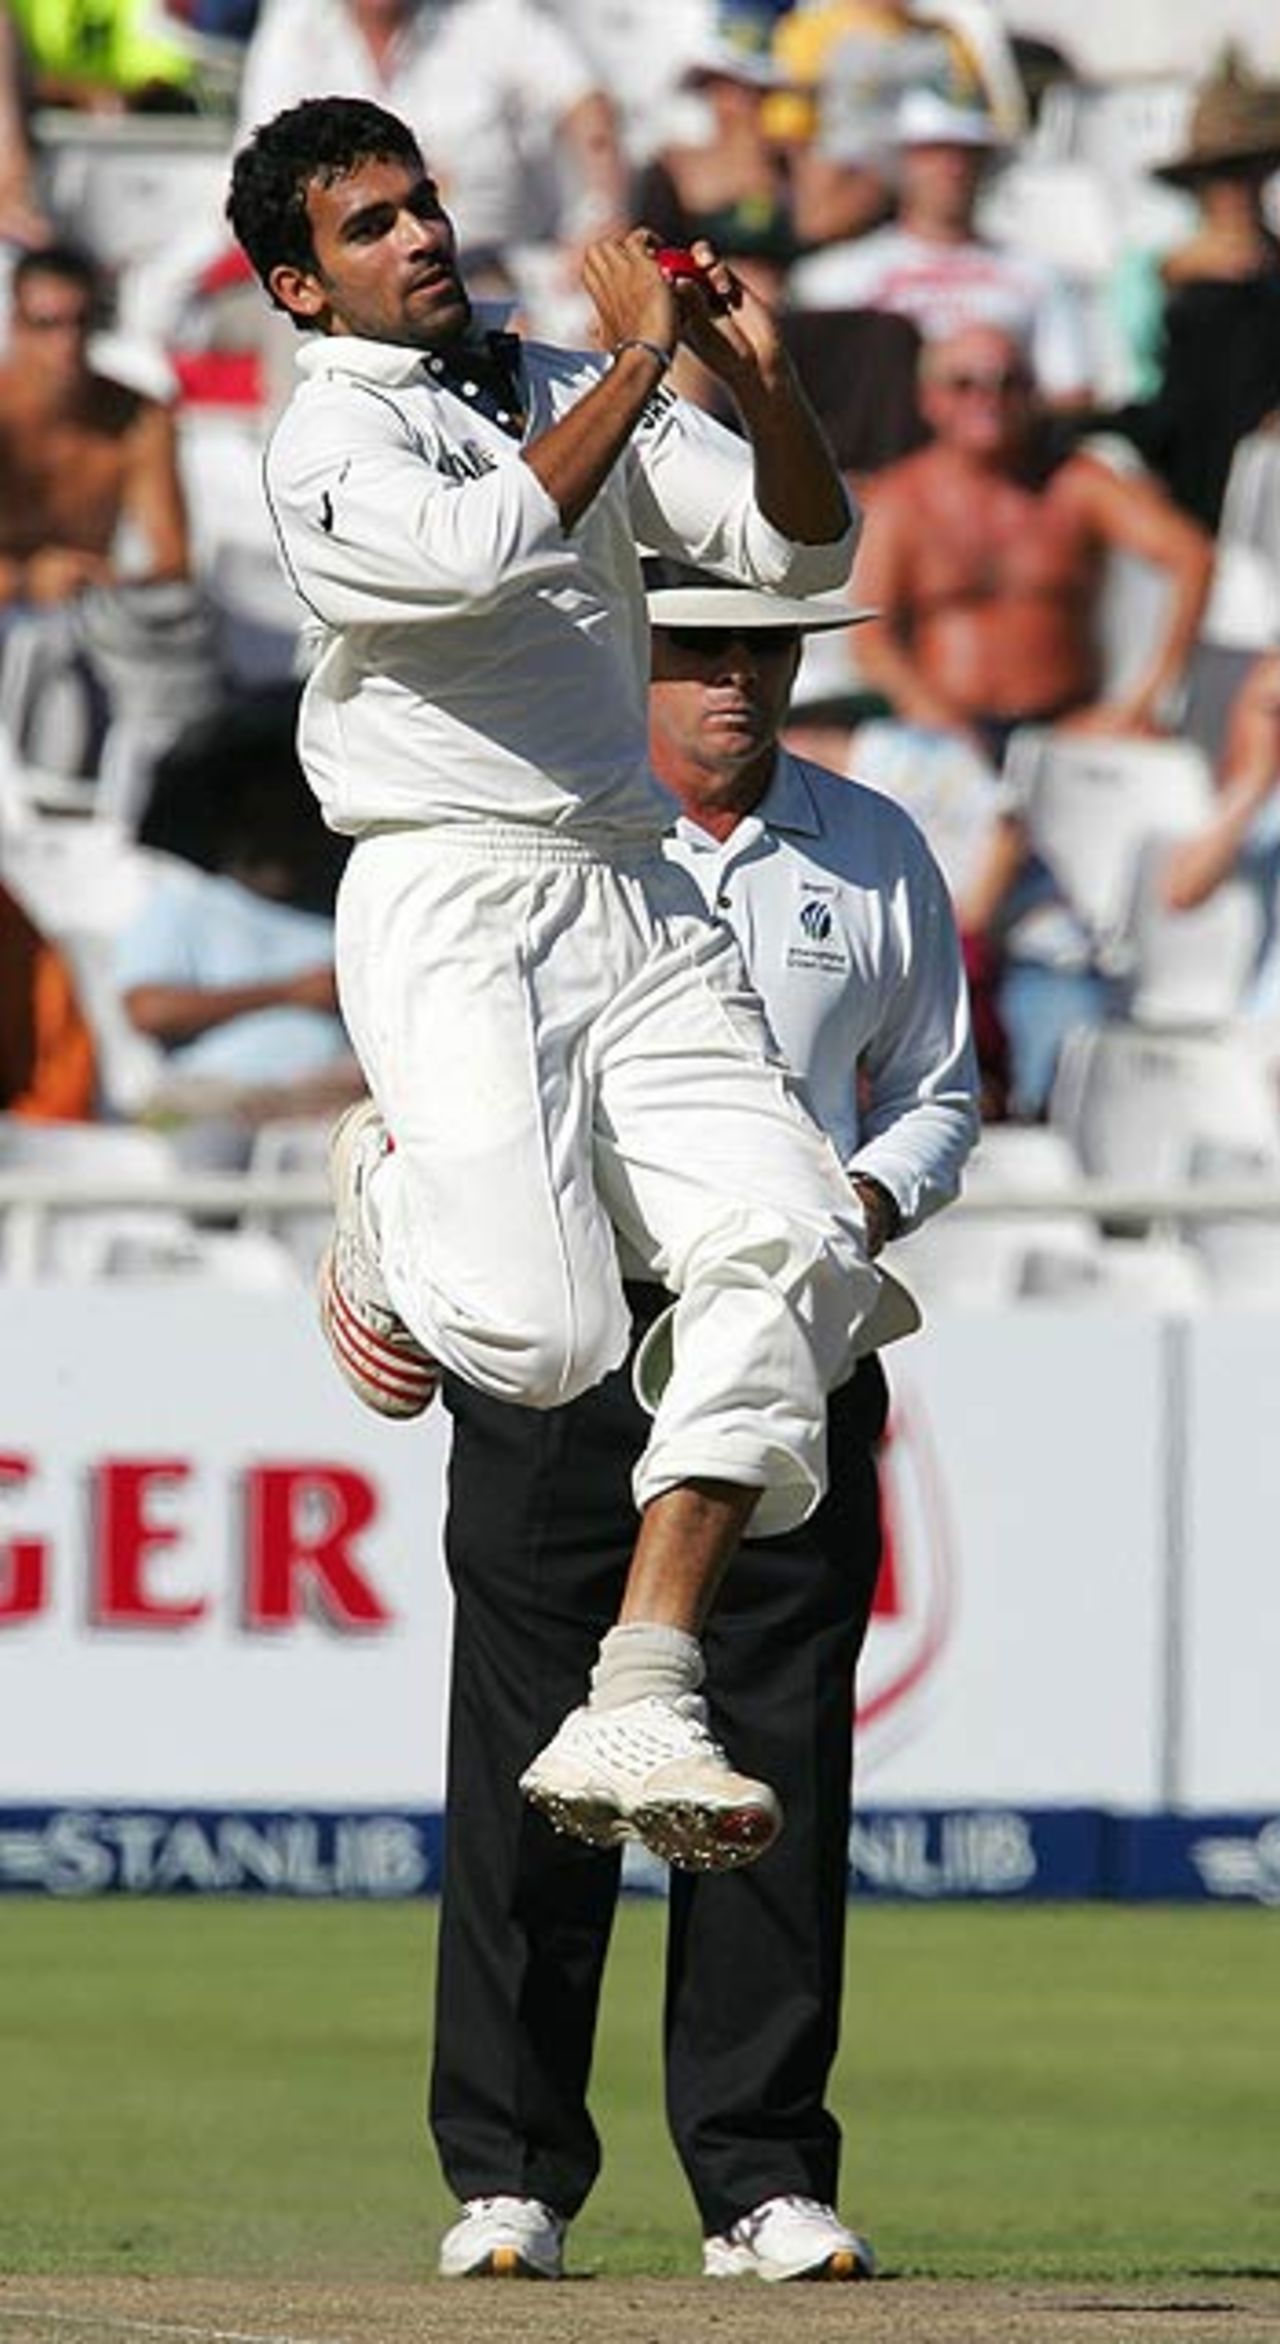 Zaheer Khan steams in, South Africa v India, 3rd Test, Cape Town, 4th day, January 5, 2007